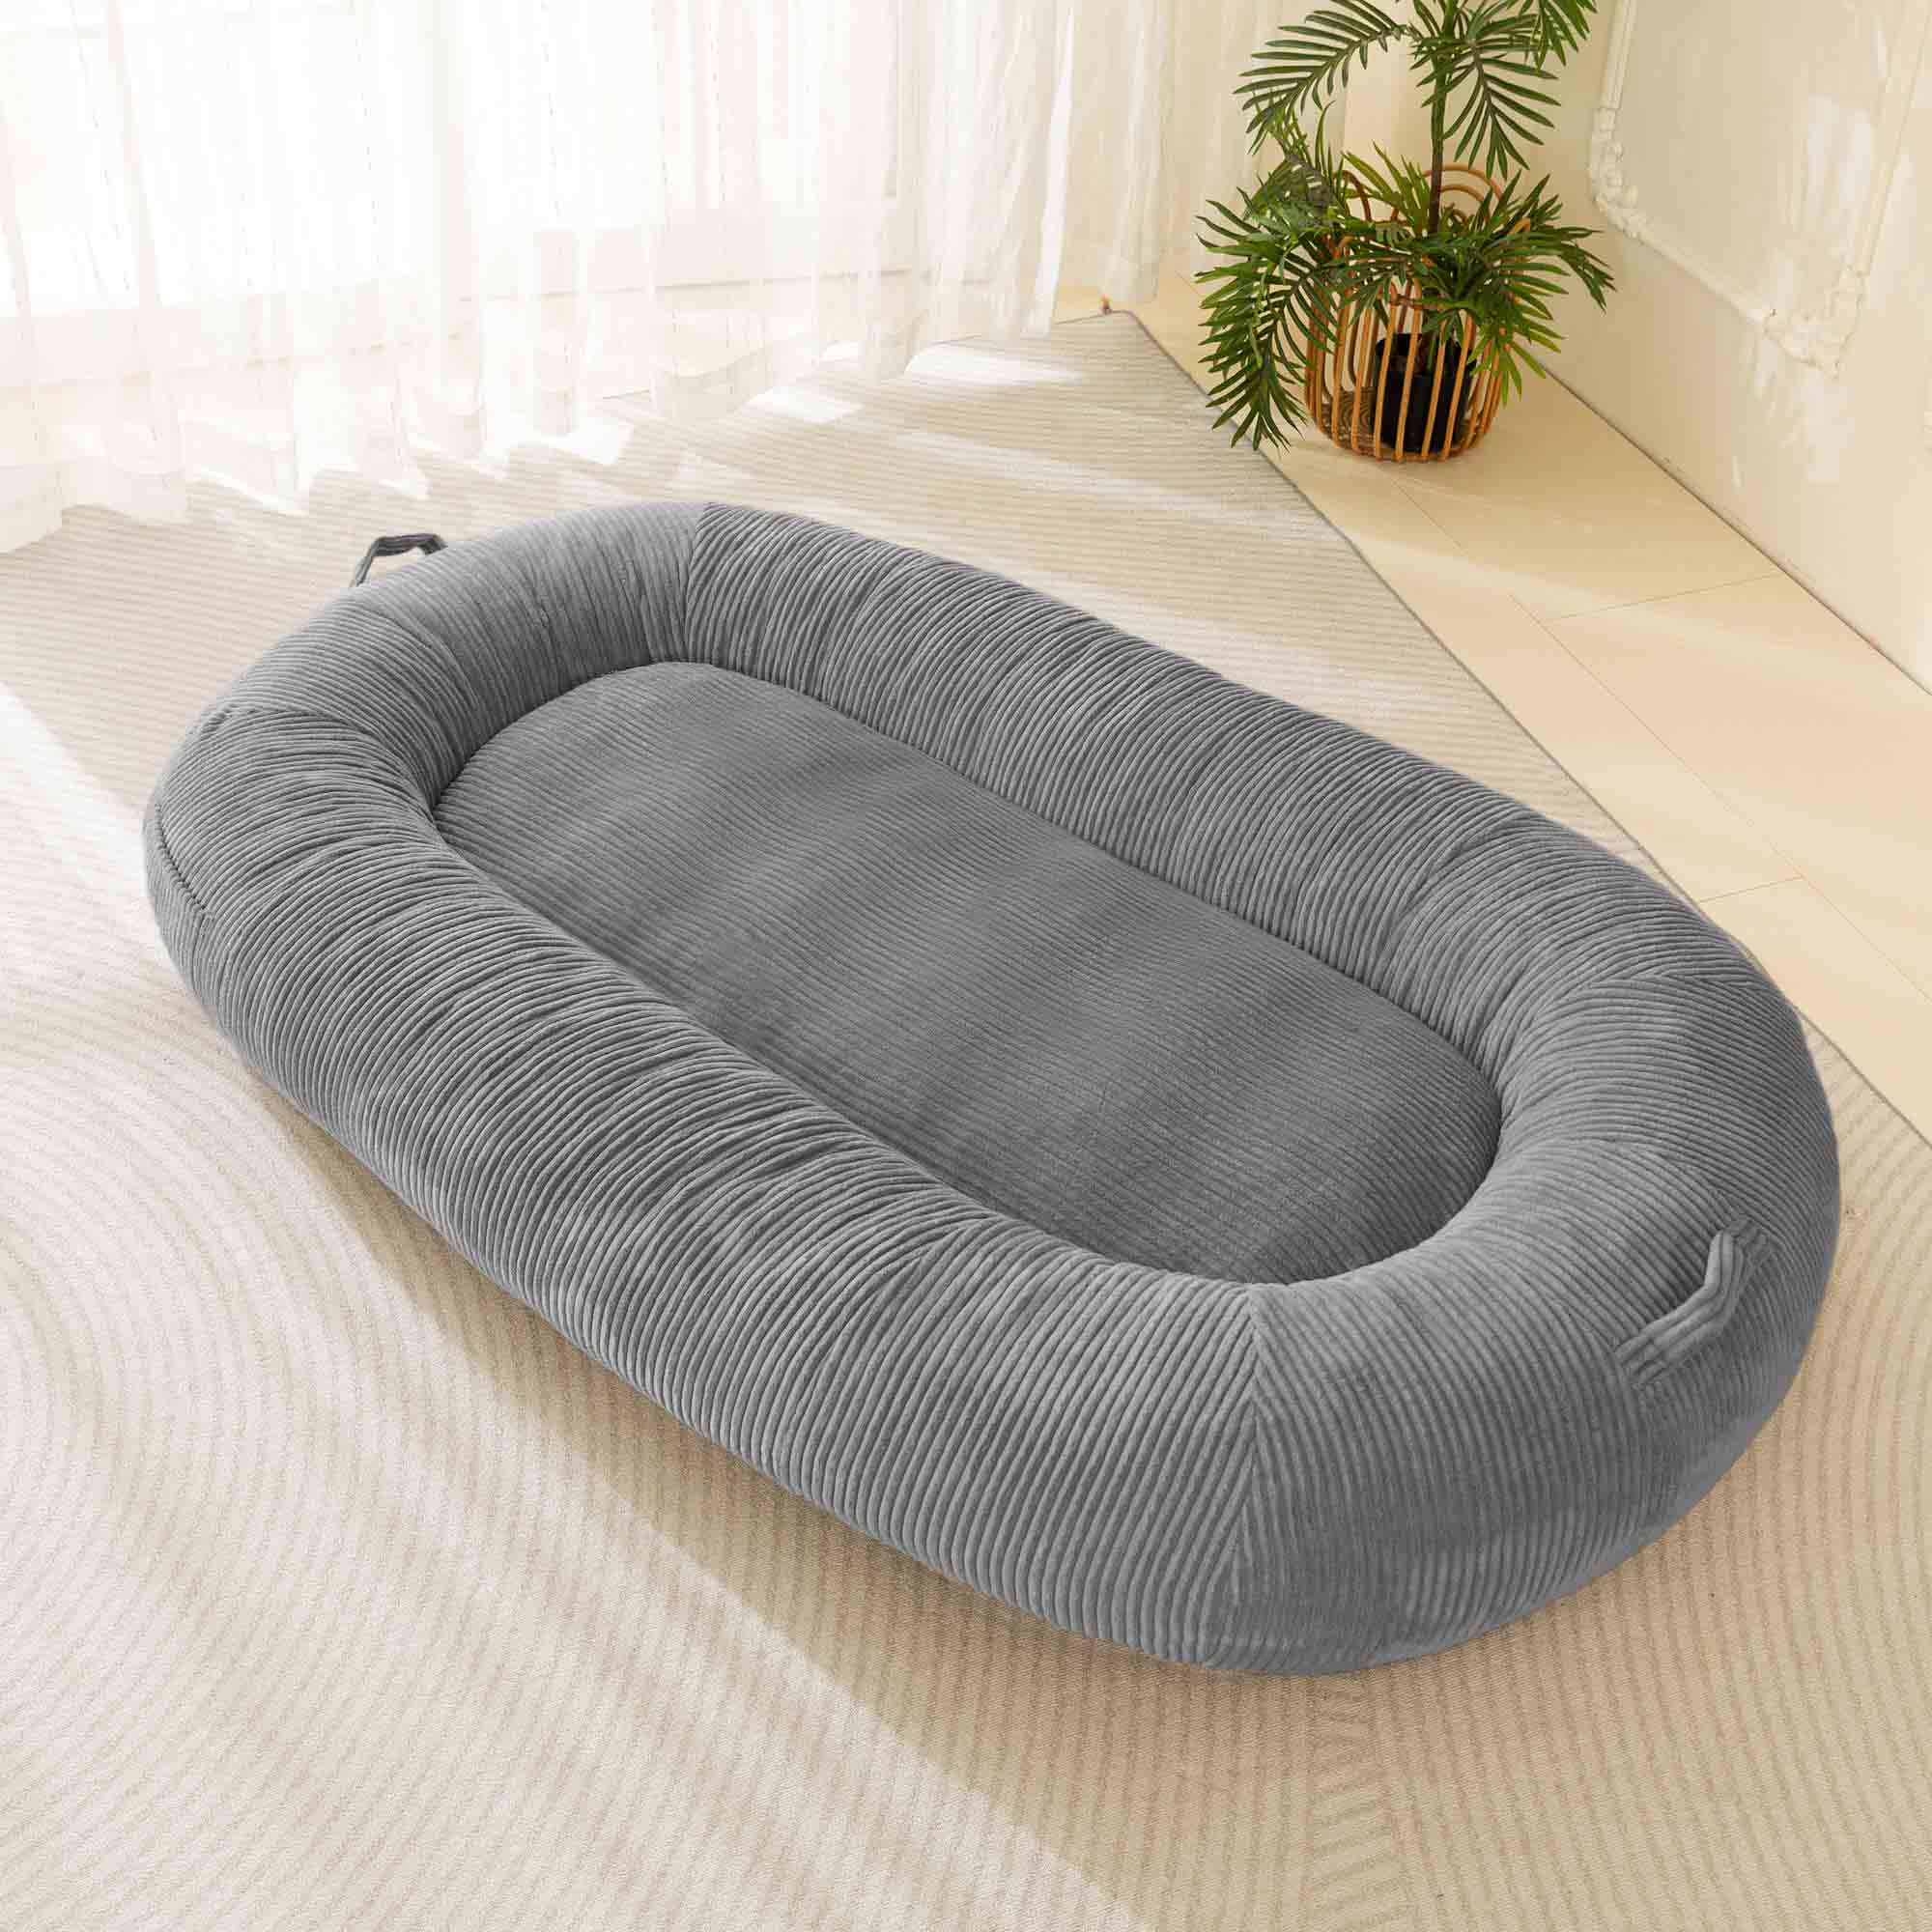  MAXYOYO Dog Bed for Human, Faux Fur Giant Bean Bag Bed for  People Adults, Extra Large Size Dog Bed for Pets, Cozy Nap Bed with Handle,  Removable Cover, Grey, 72.8x45.3x12 